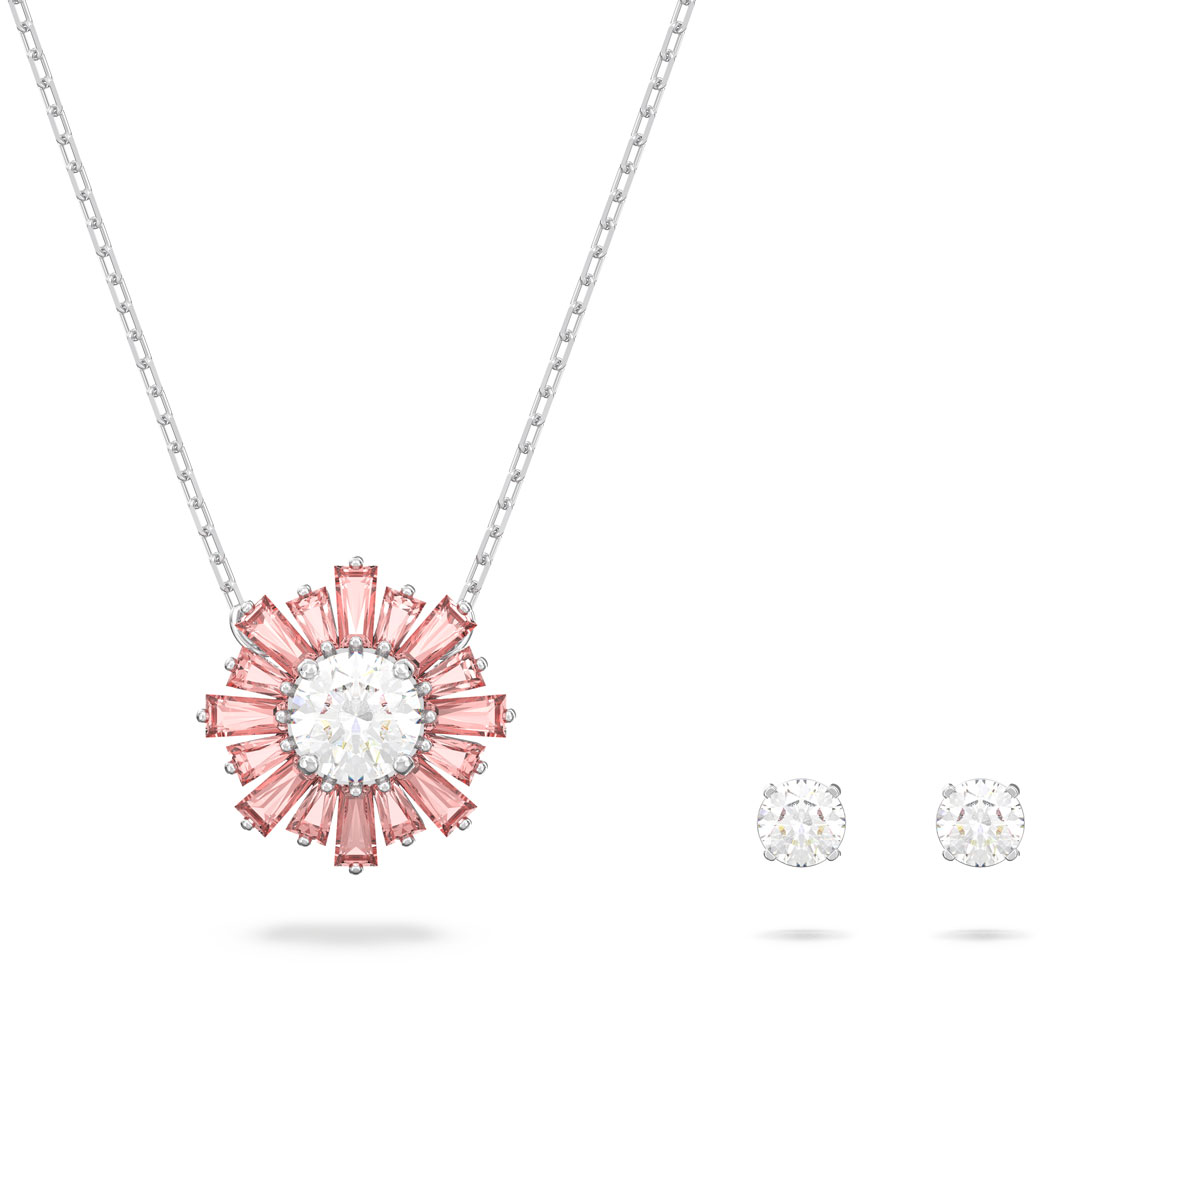 Swarovski Pink and Rhodium Sunshine Necklace and Earrings Set